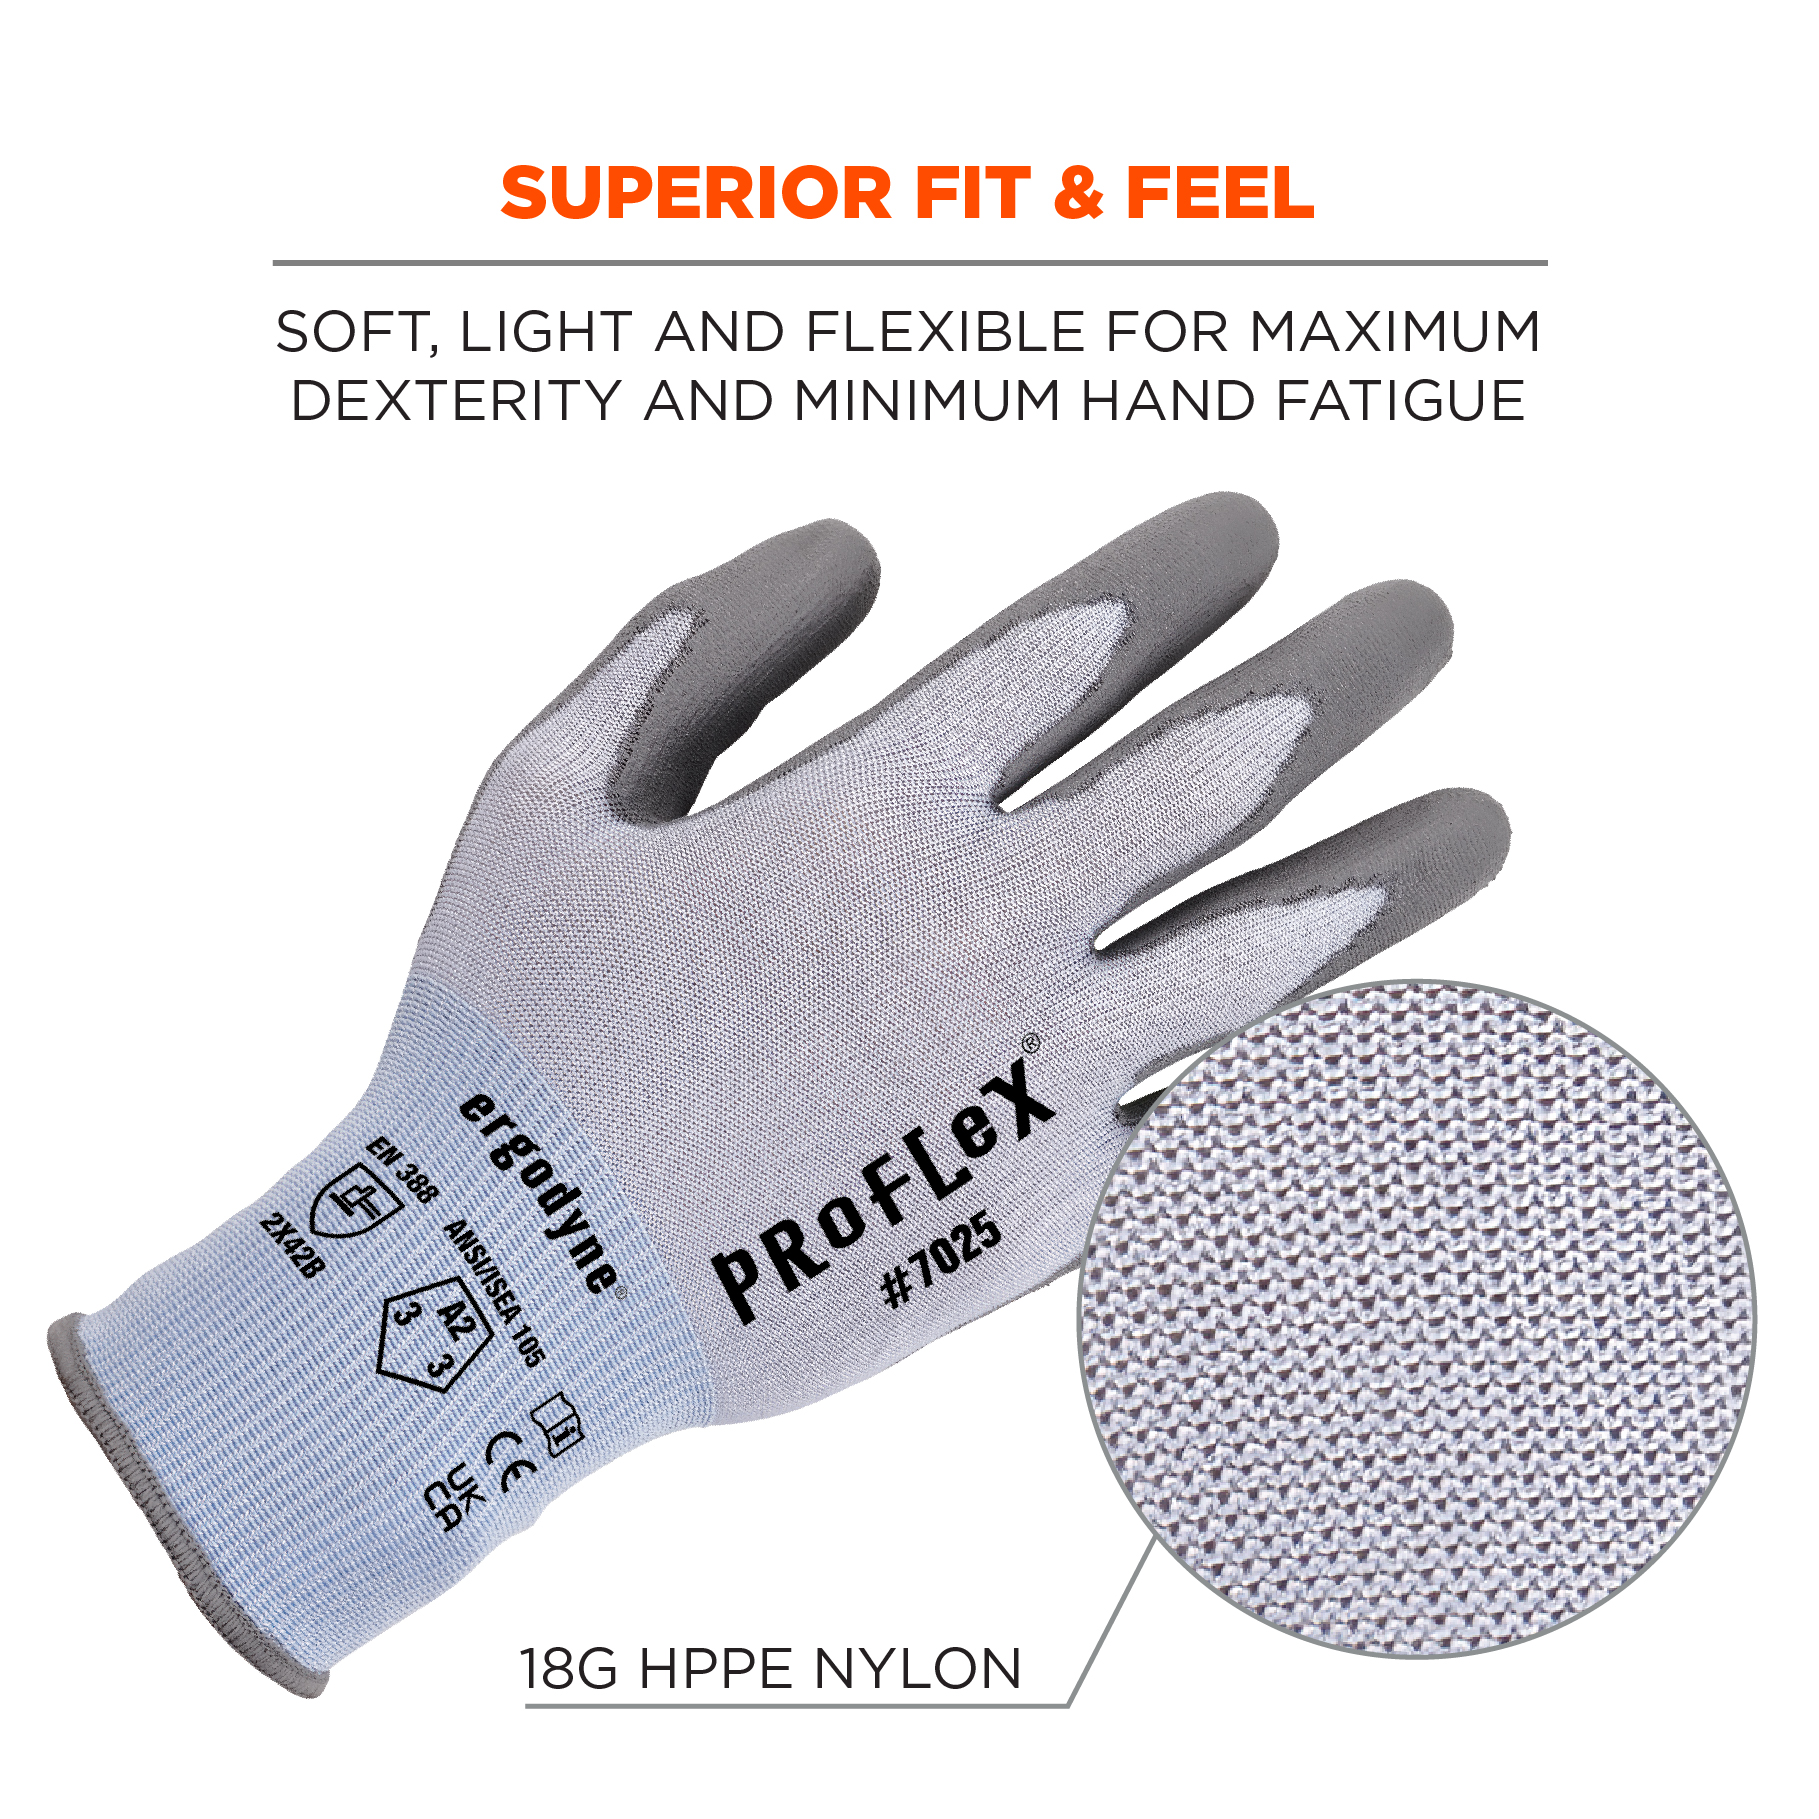 https://www.ergodyne.com/sites/default/files/product-images/10432-7025-ansi-a2-pu-coated-cr-gloves-gray-superior-fit-and-feel_0.jpg